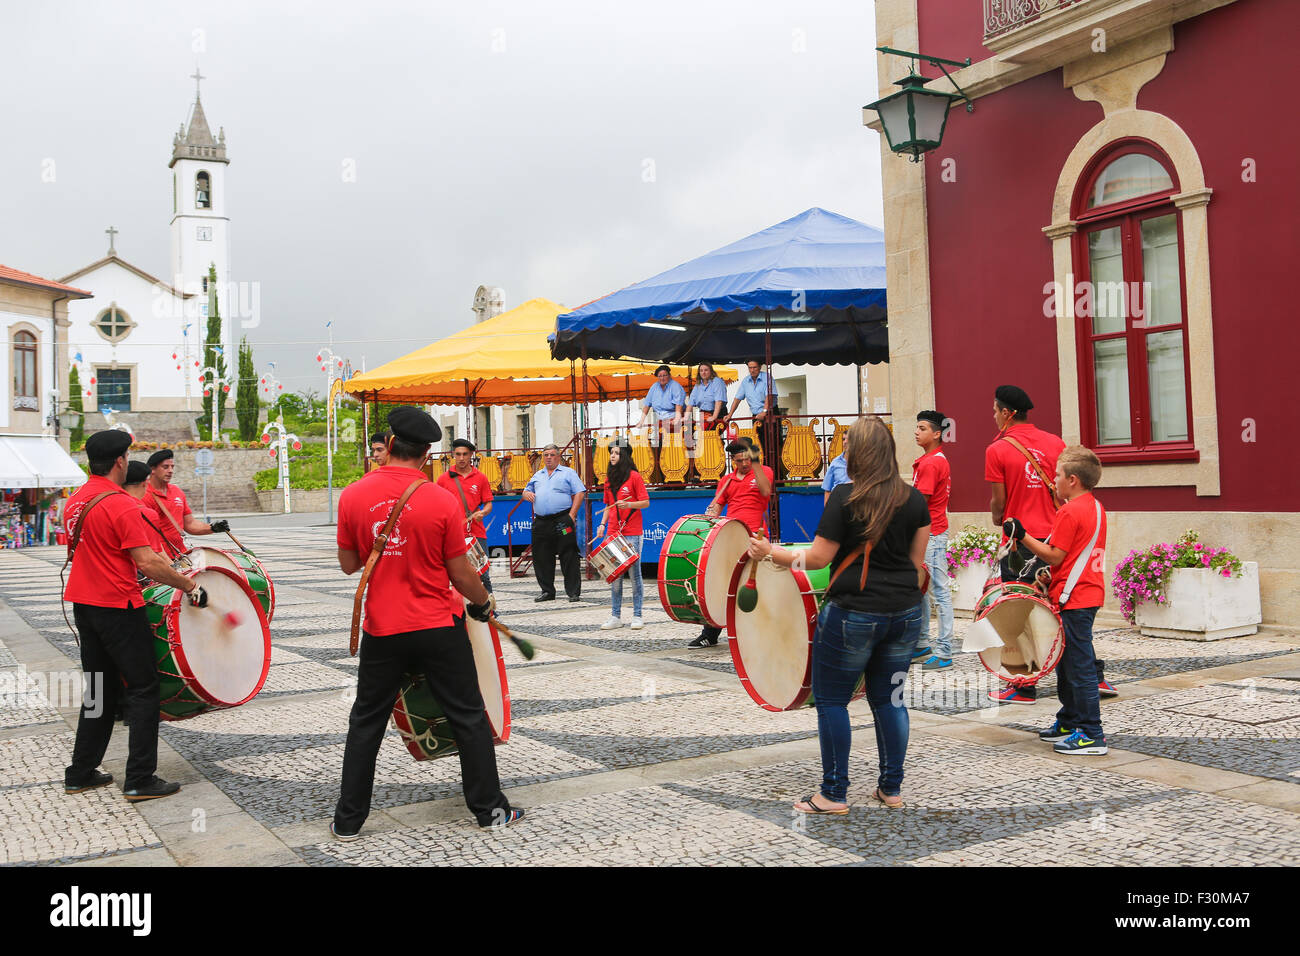 PAREDES DE COURA, PORTUGAL - AUGUST 8, 2014: Folkloristic drum band in the center of Paredes de Coura in Norte region, Portugal Stock Photo